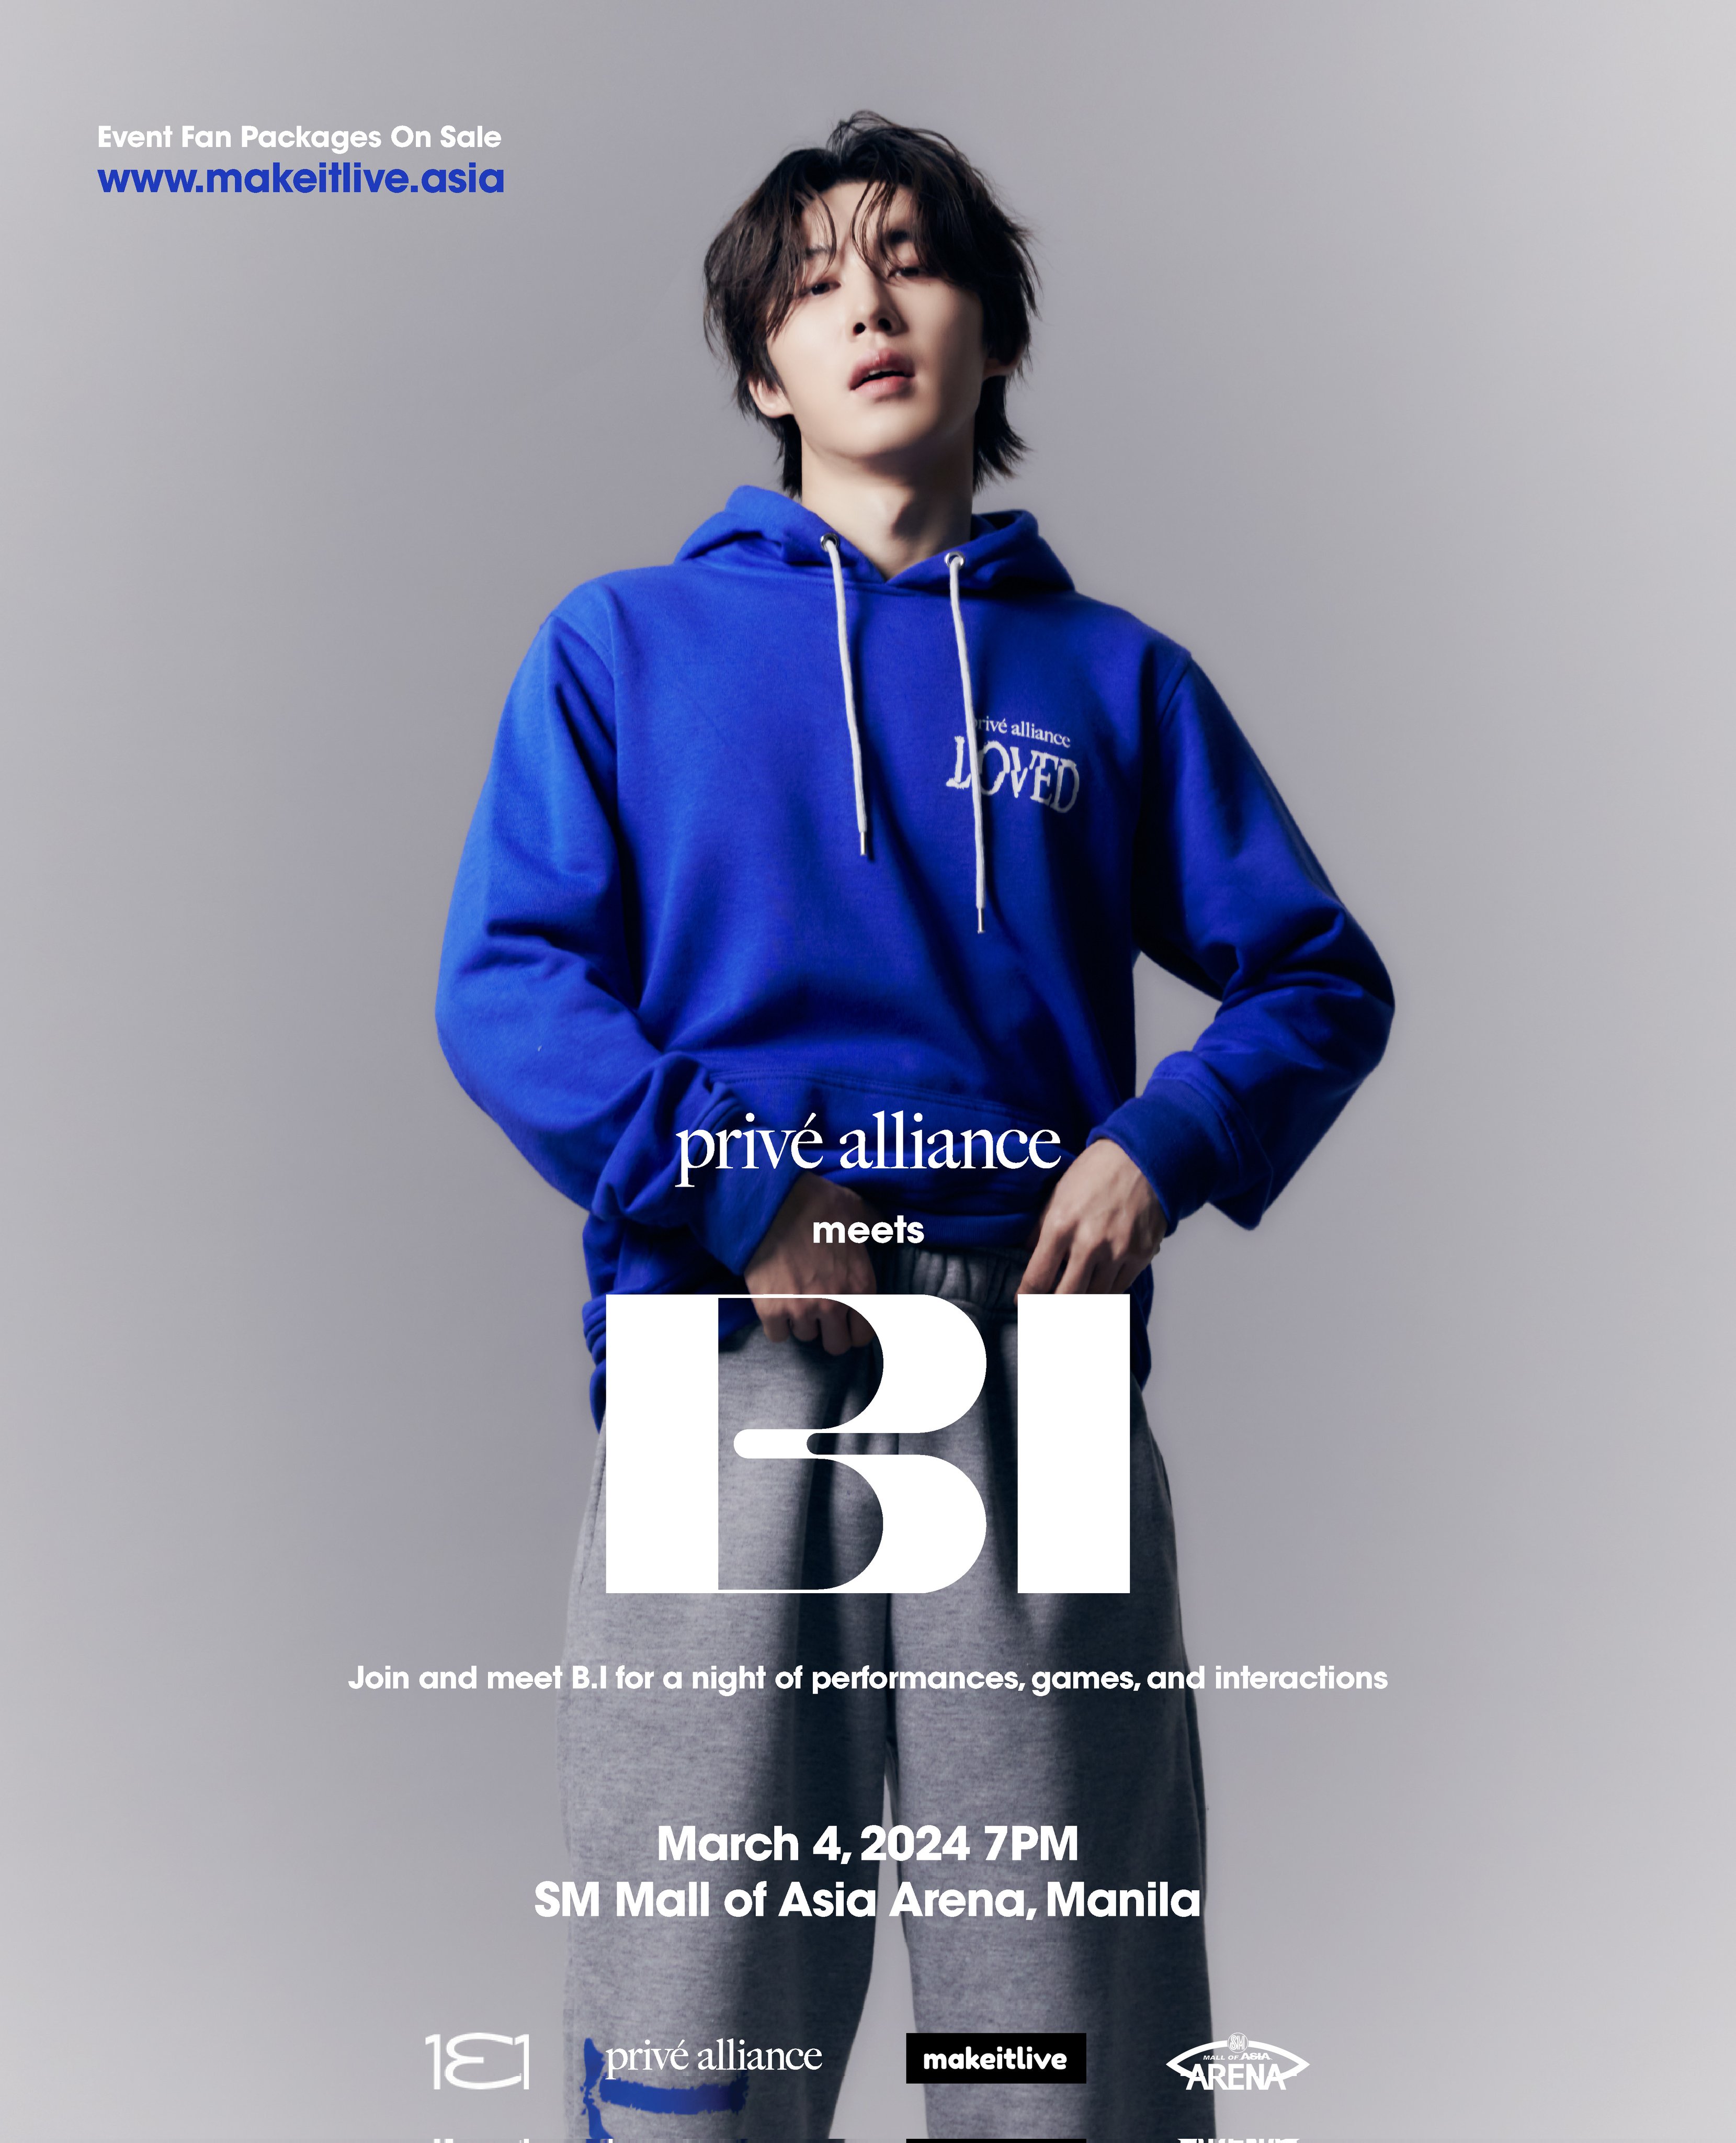 [UPCOMING EVENT] Privé Alliance Meets B.I in Manila